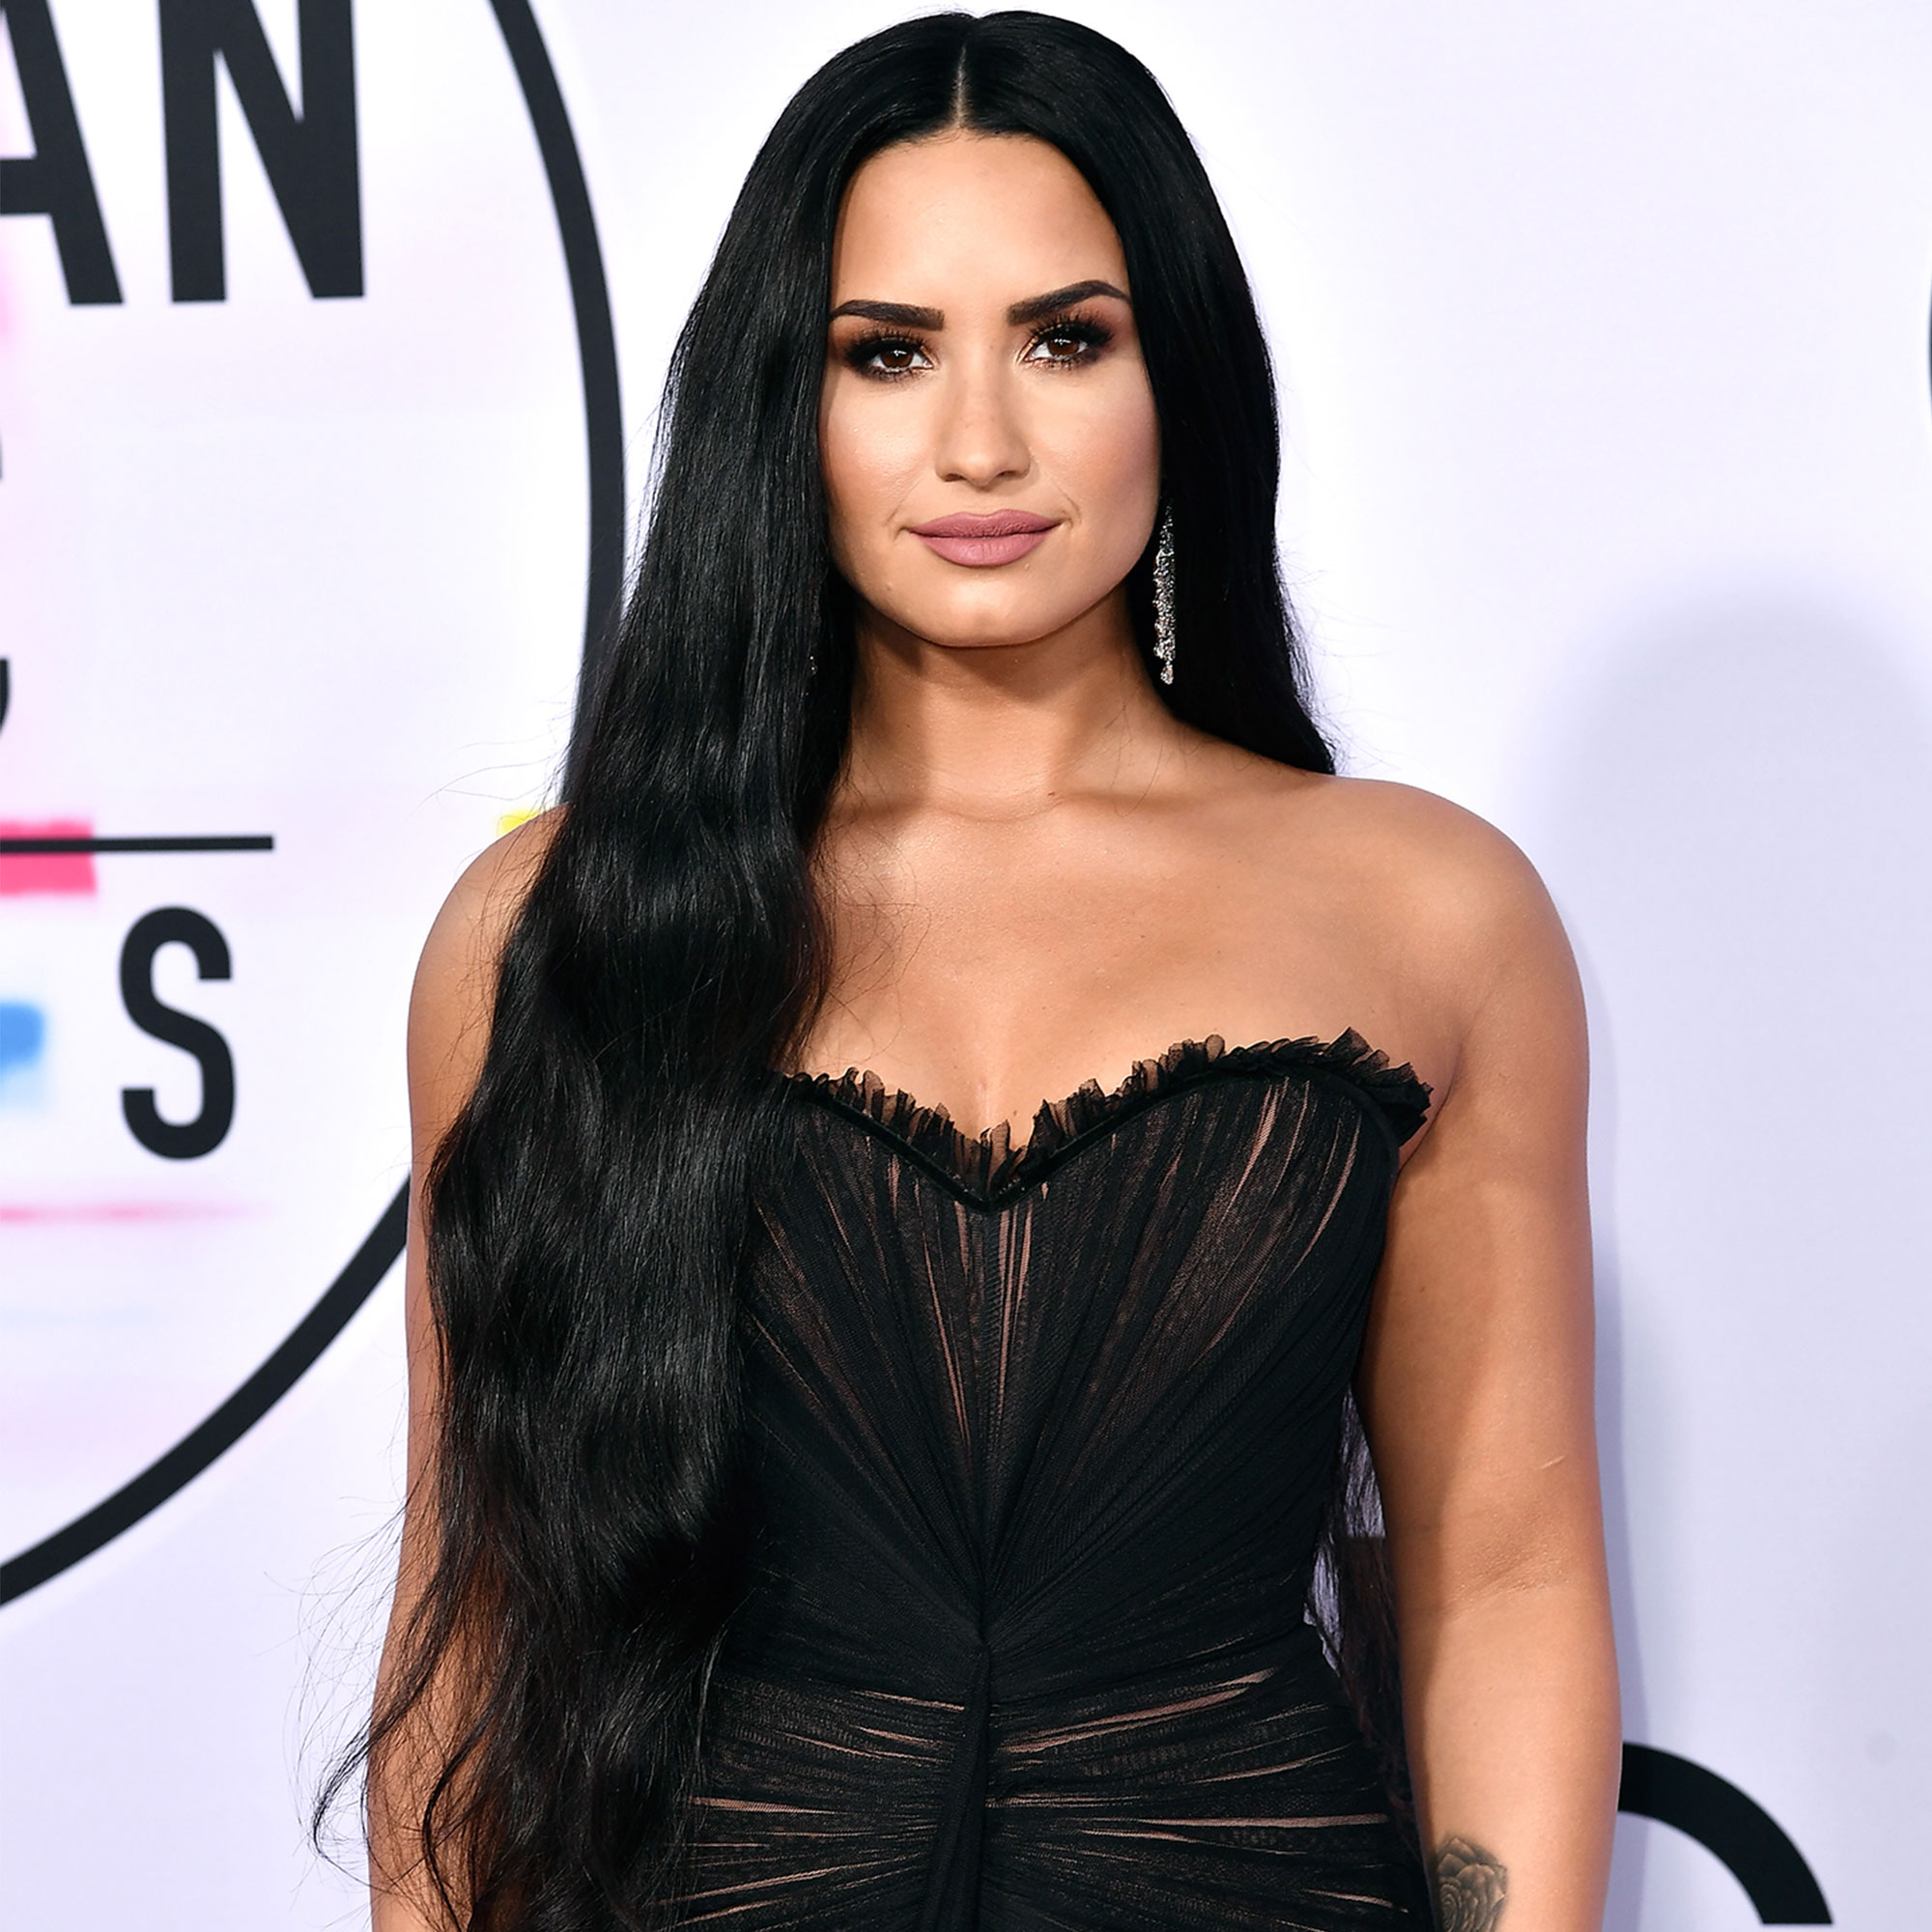 Demi Lovato Lesbian Sex - Demi Lovato's Coming Out Journey: Everything They've Said